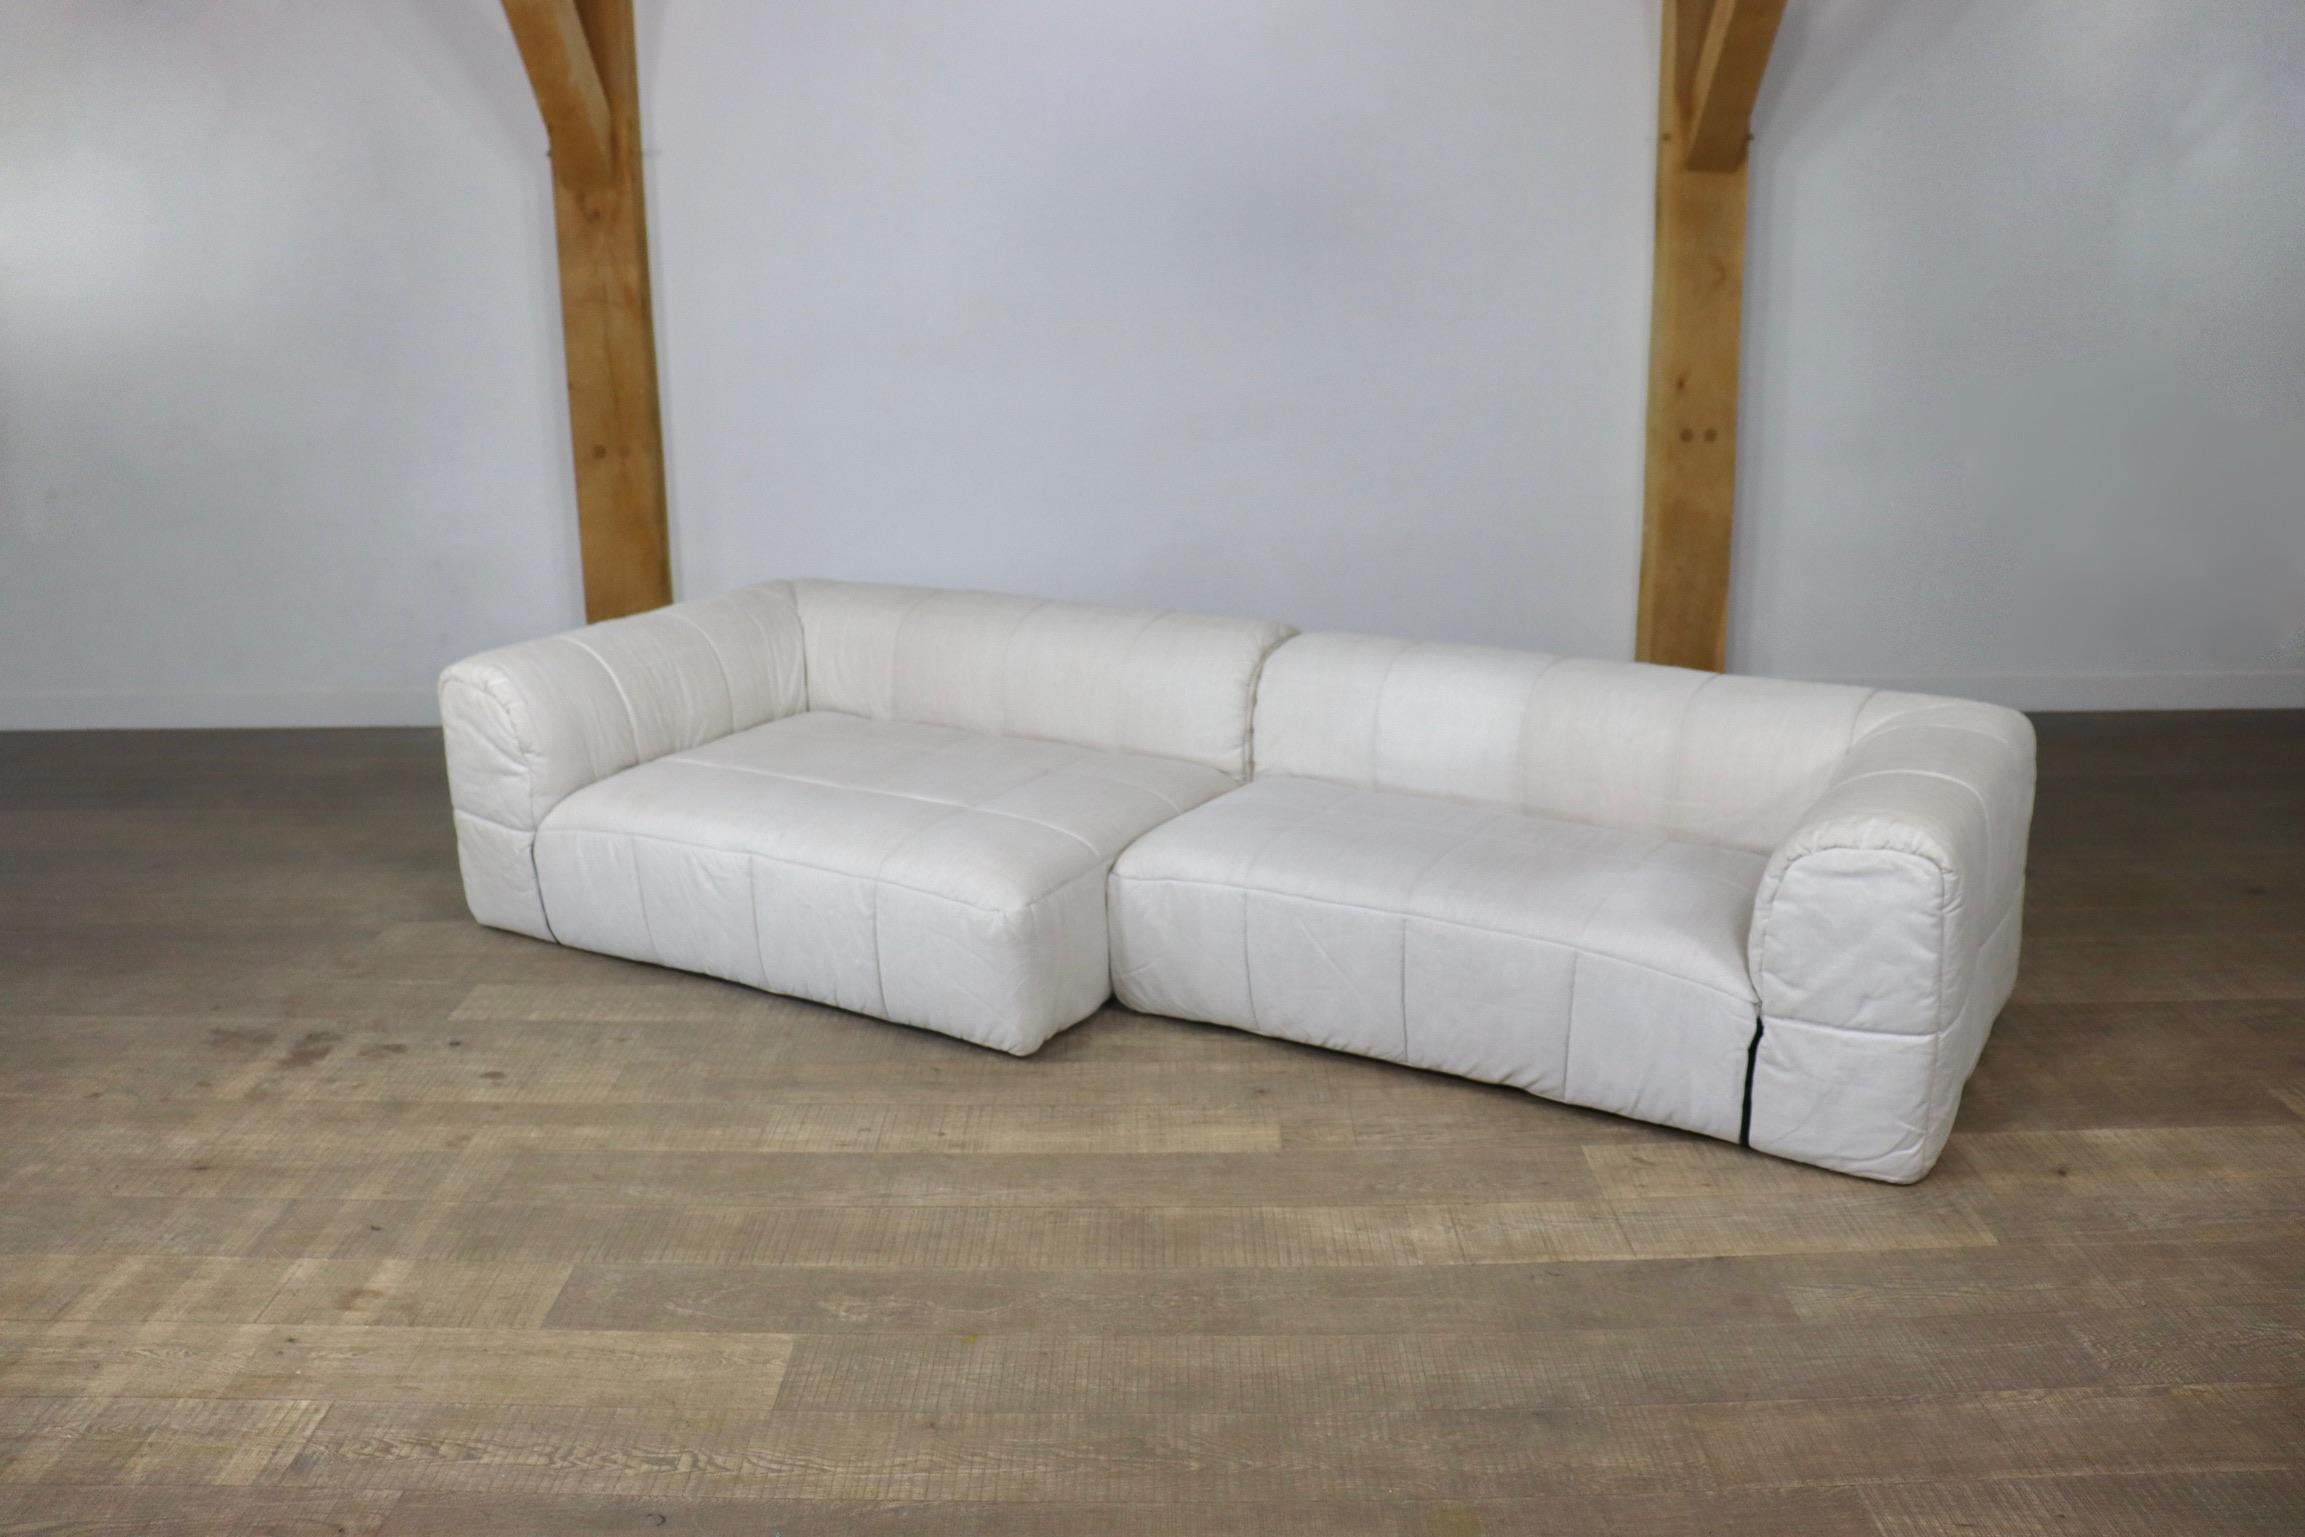 Beautiful modern lounge sofa model Strips designed by Cini Boeri for Arflex, Italy 1972. This incredibly comfortable sofa and has its original white linen upholstery. The sofa can be arranged in different settings to create the perfect lounge! The